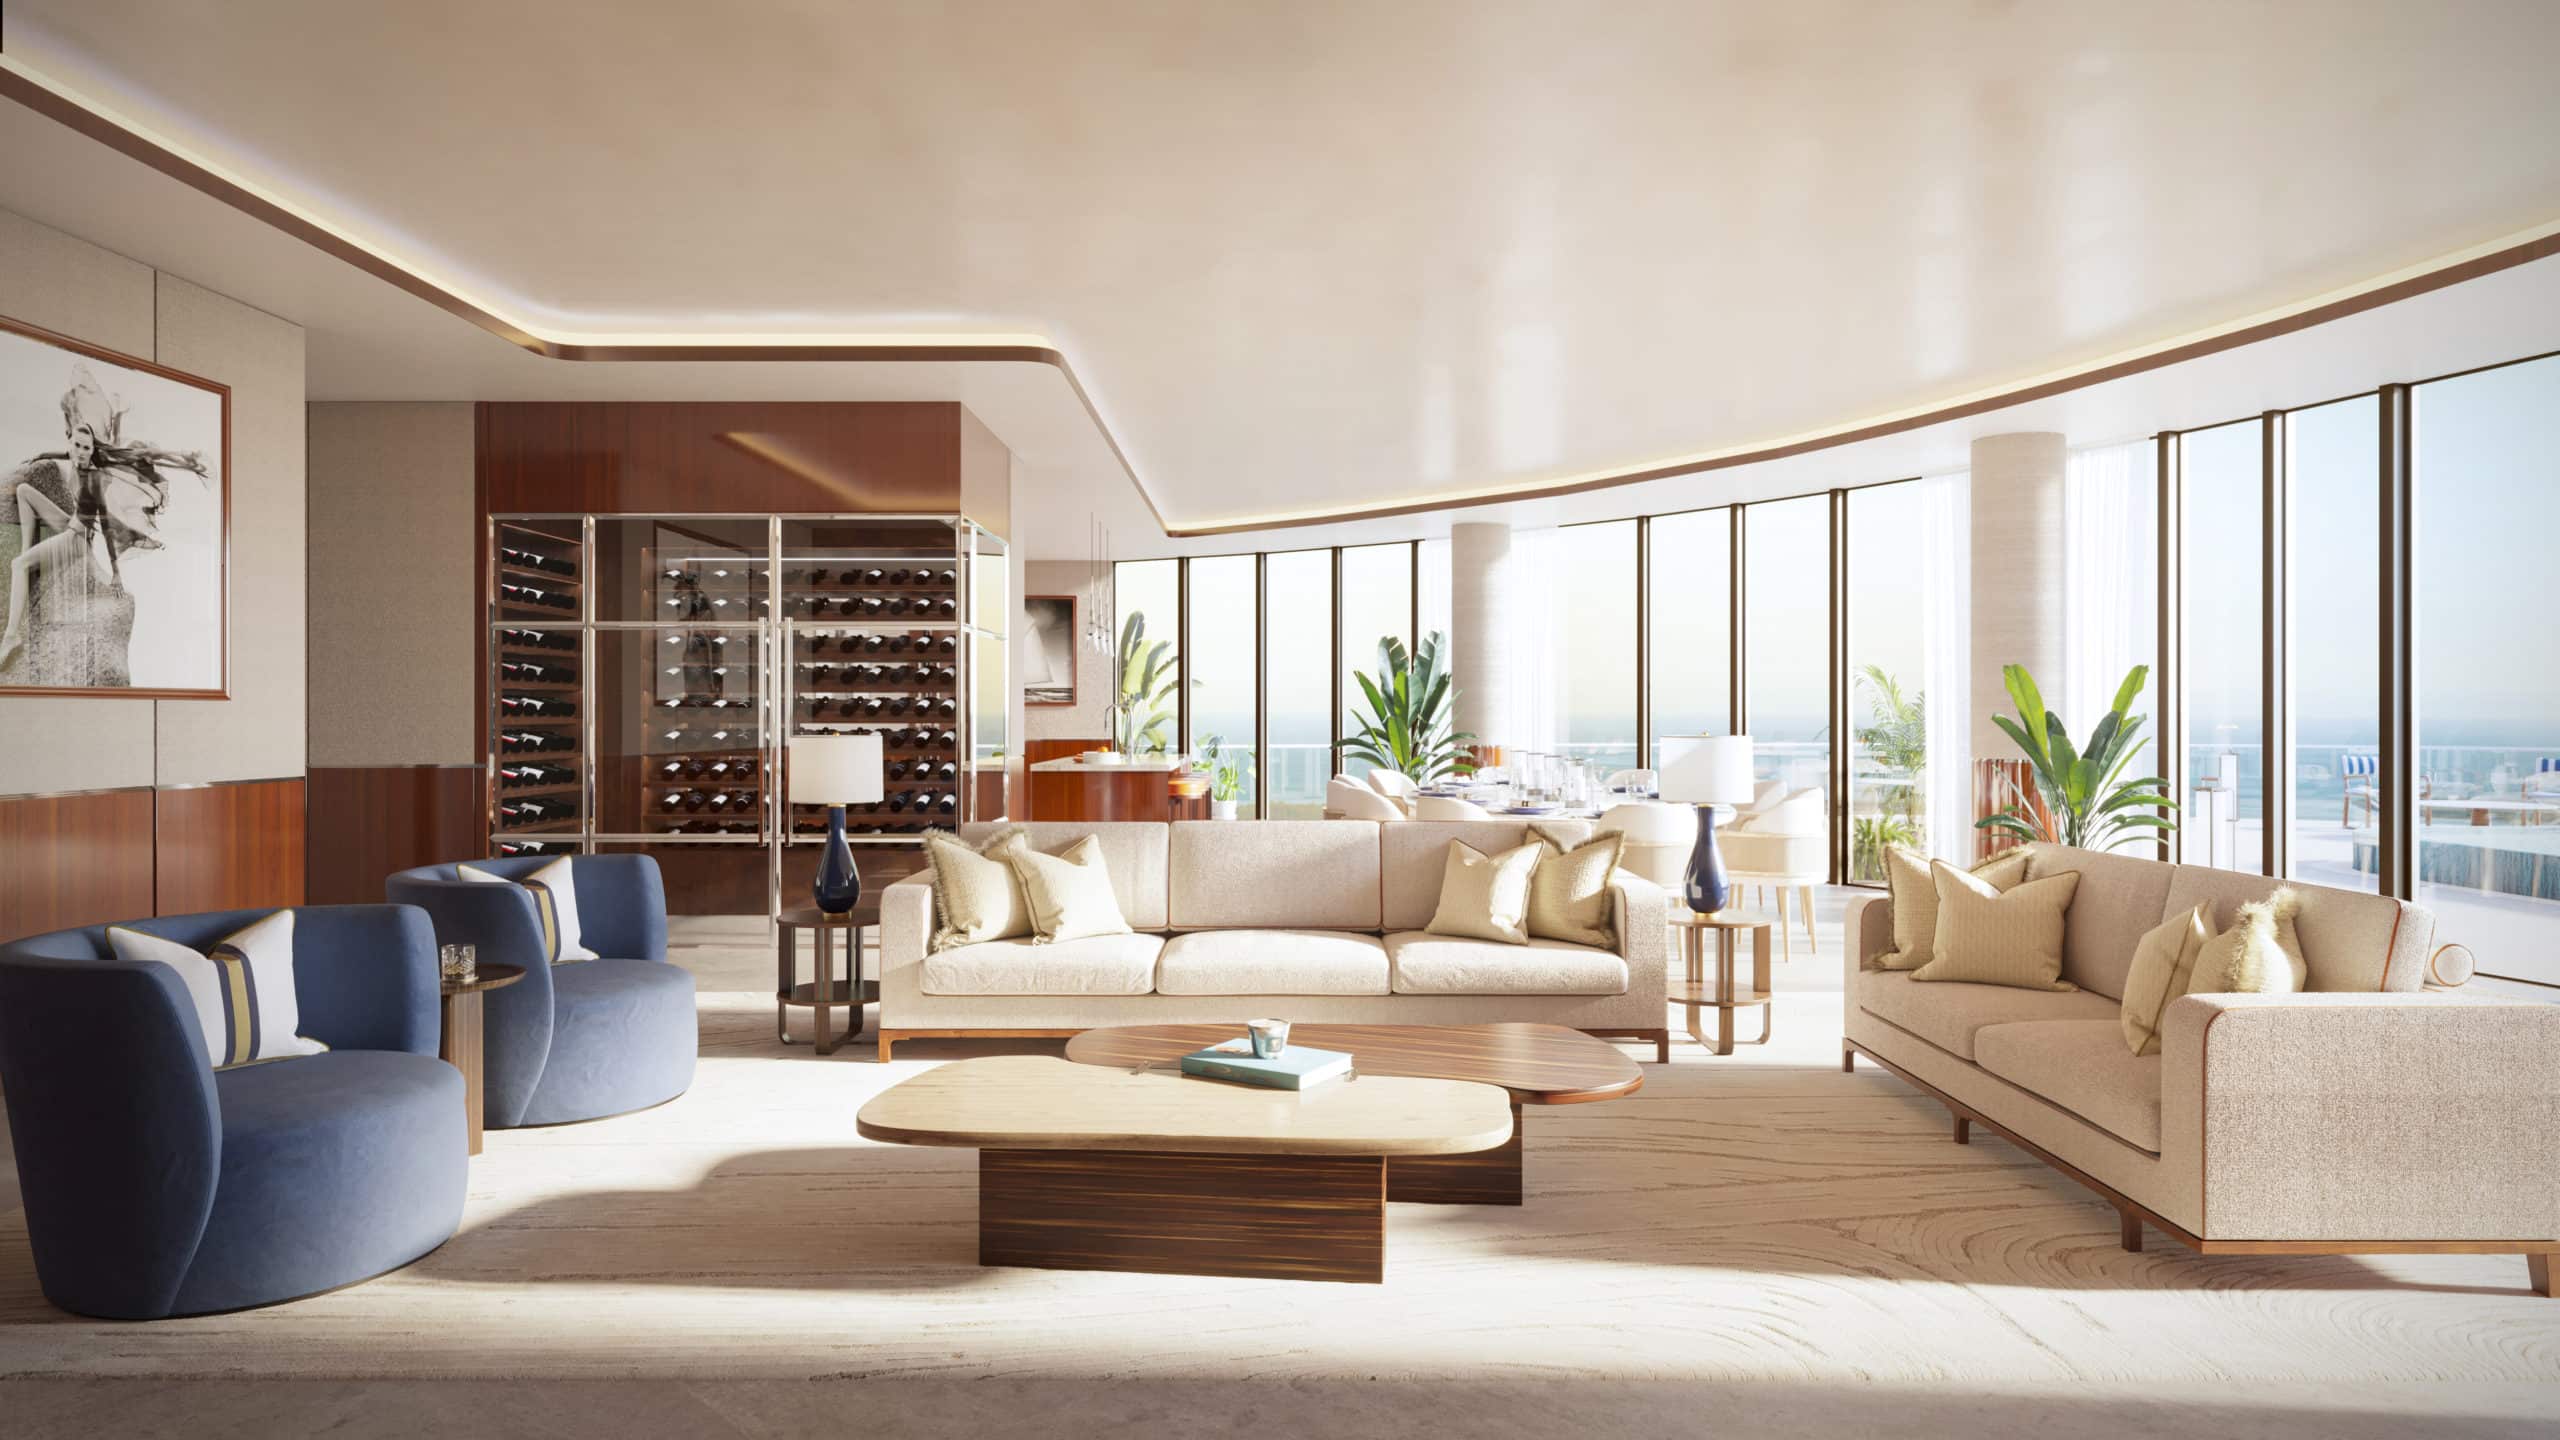 Cipriani Residences (Image: The Boundary)